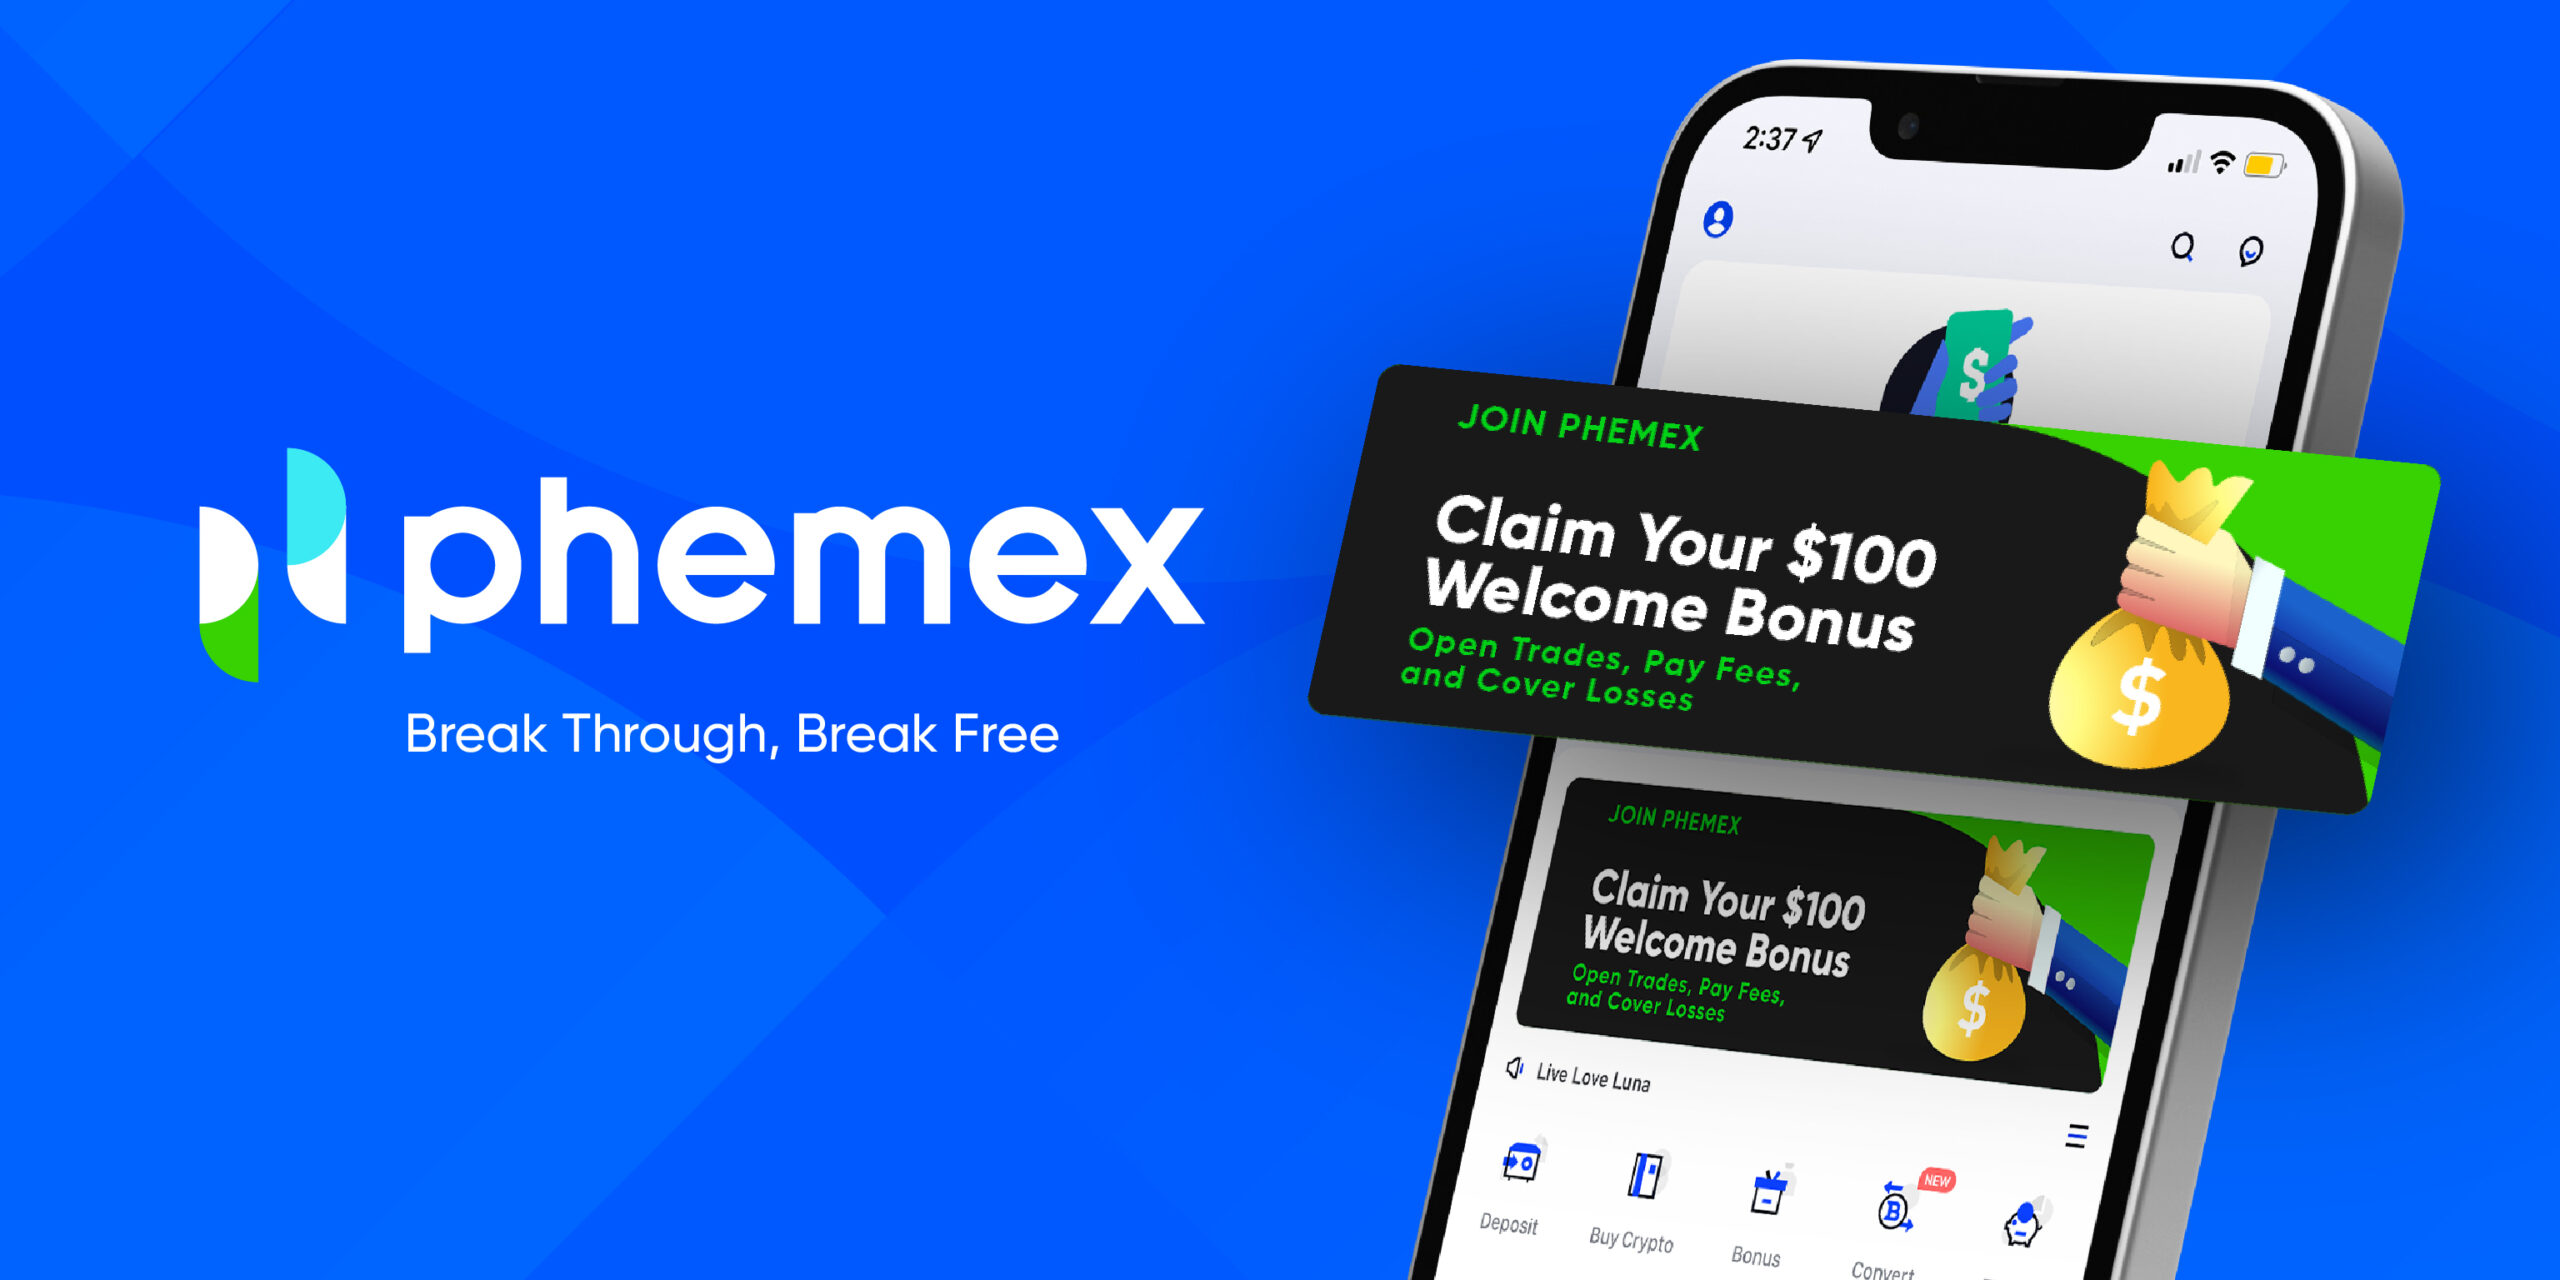 Phemex mobile app provides first class crypto trading even when you are on the go